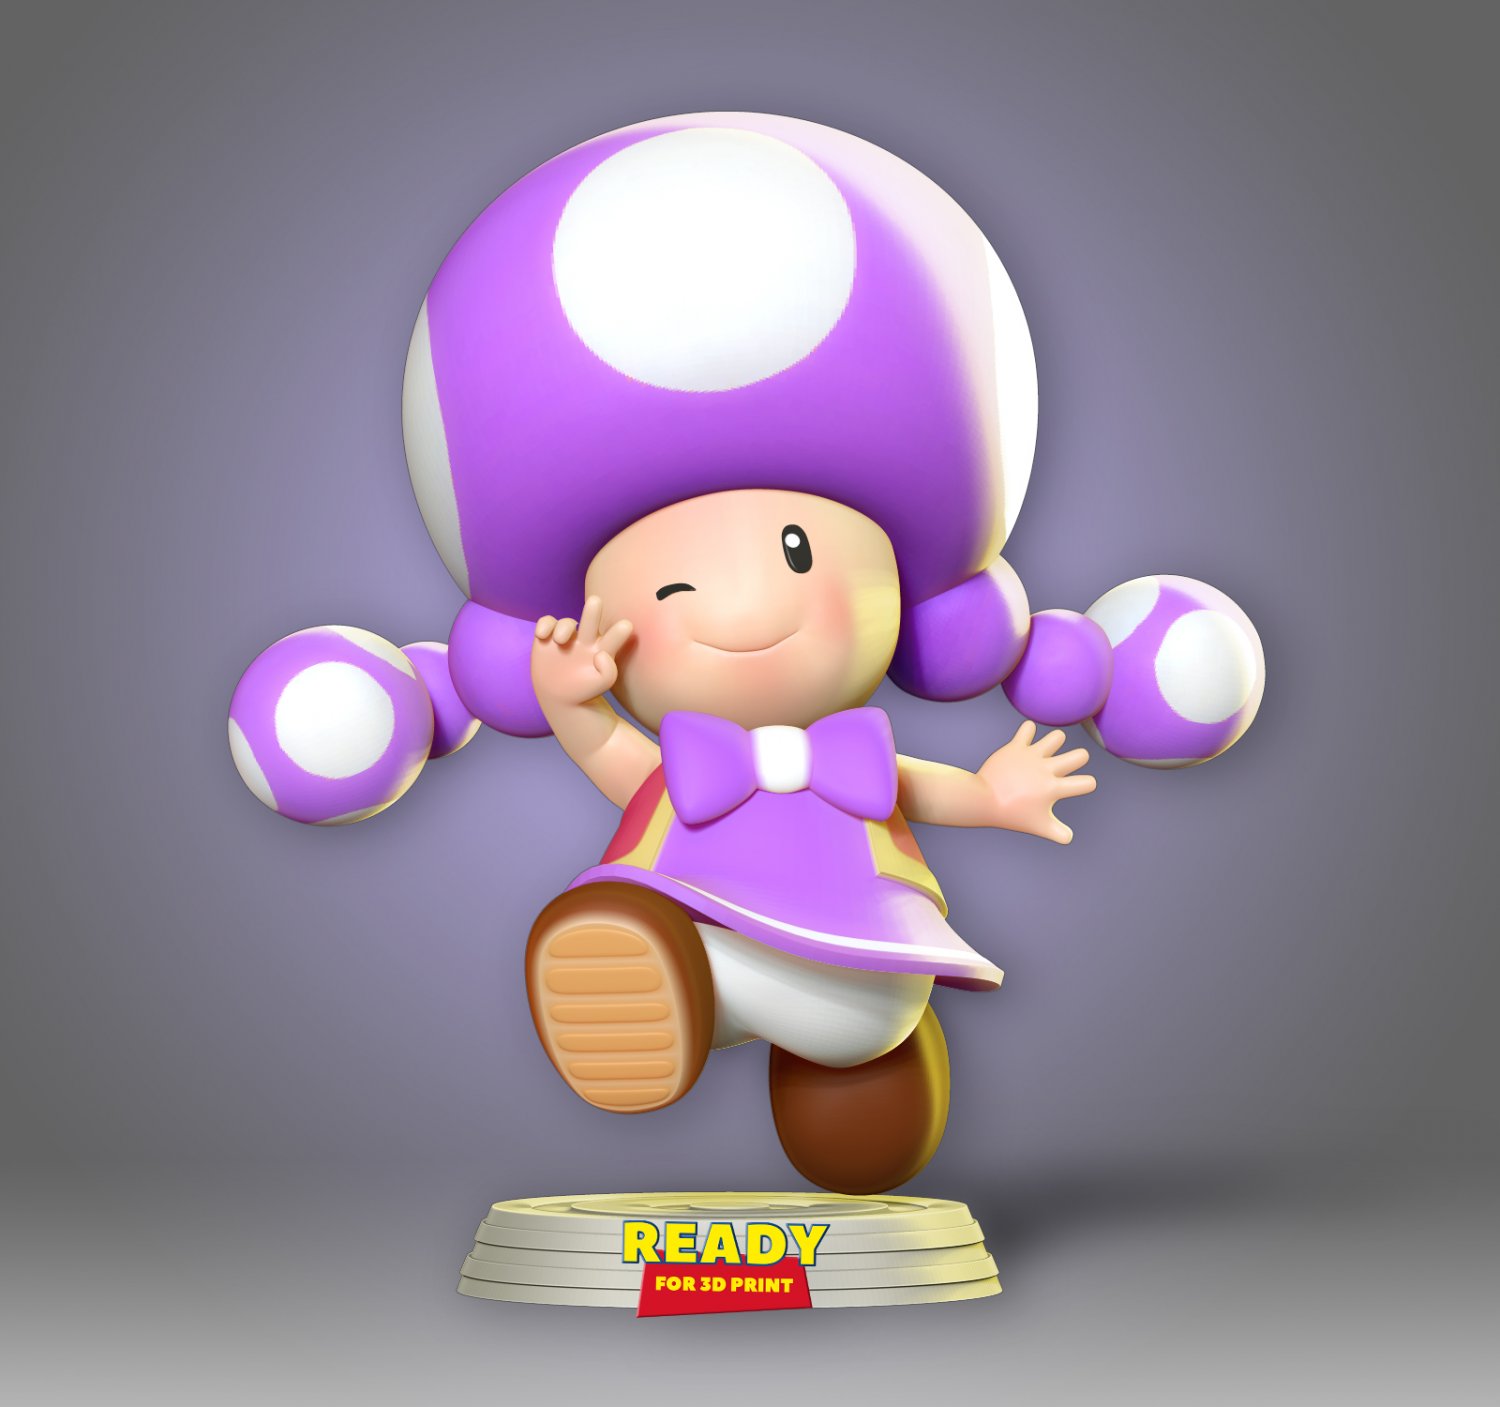 Pictures of toadette